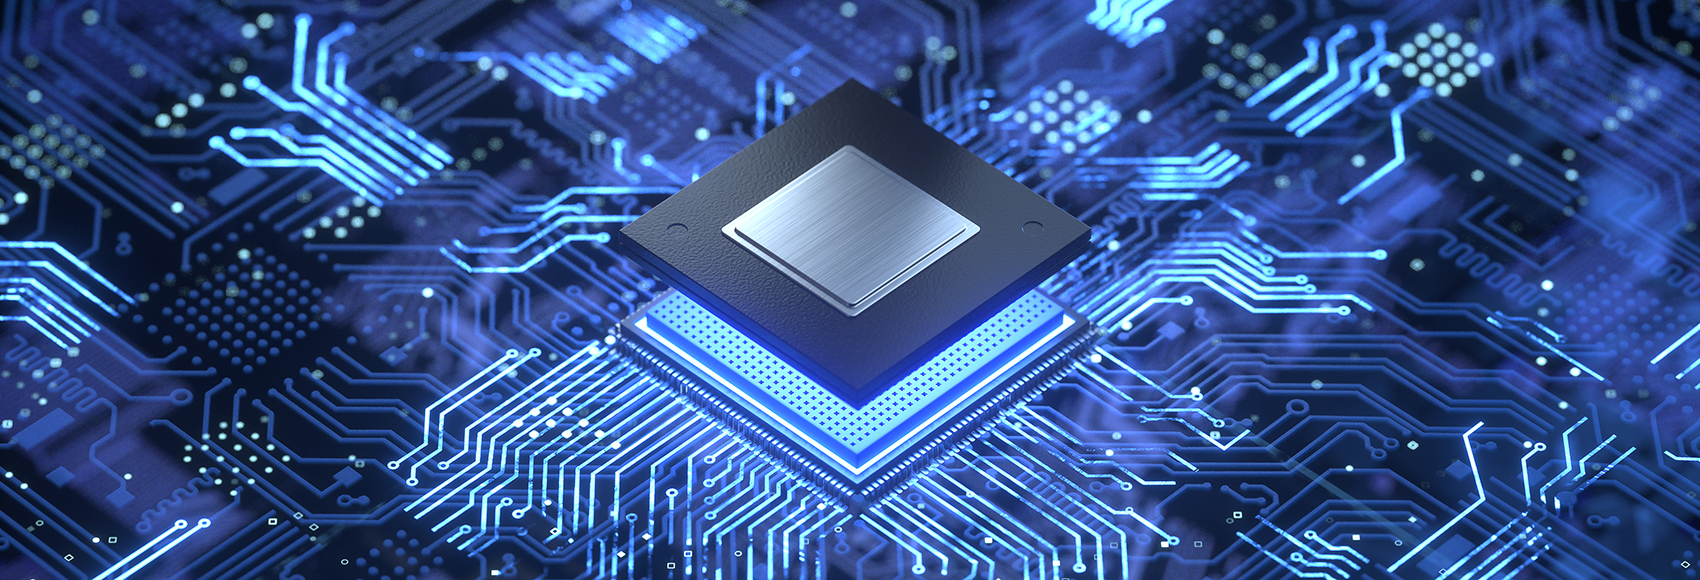 Introducing the  MVIS US Listed Semiconductor 10% Capped ESG Index